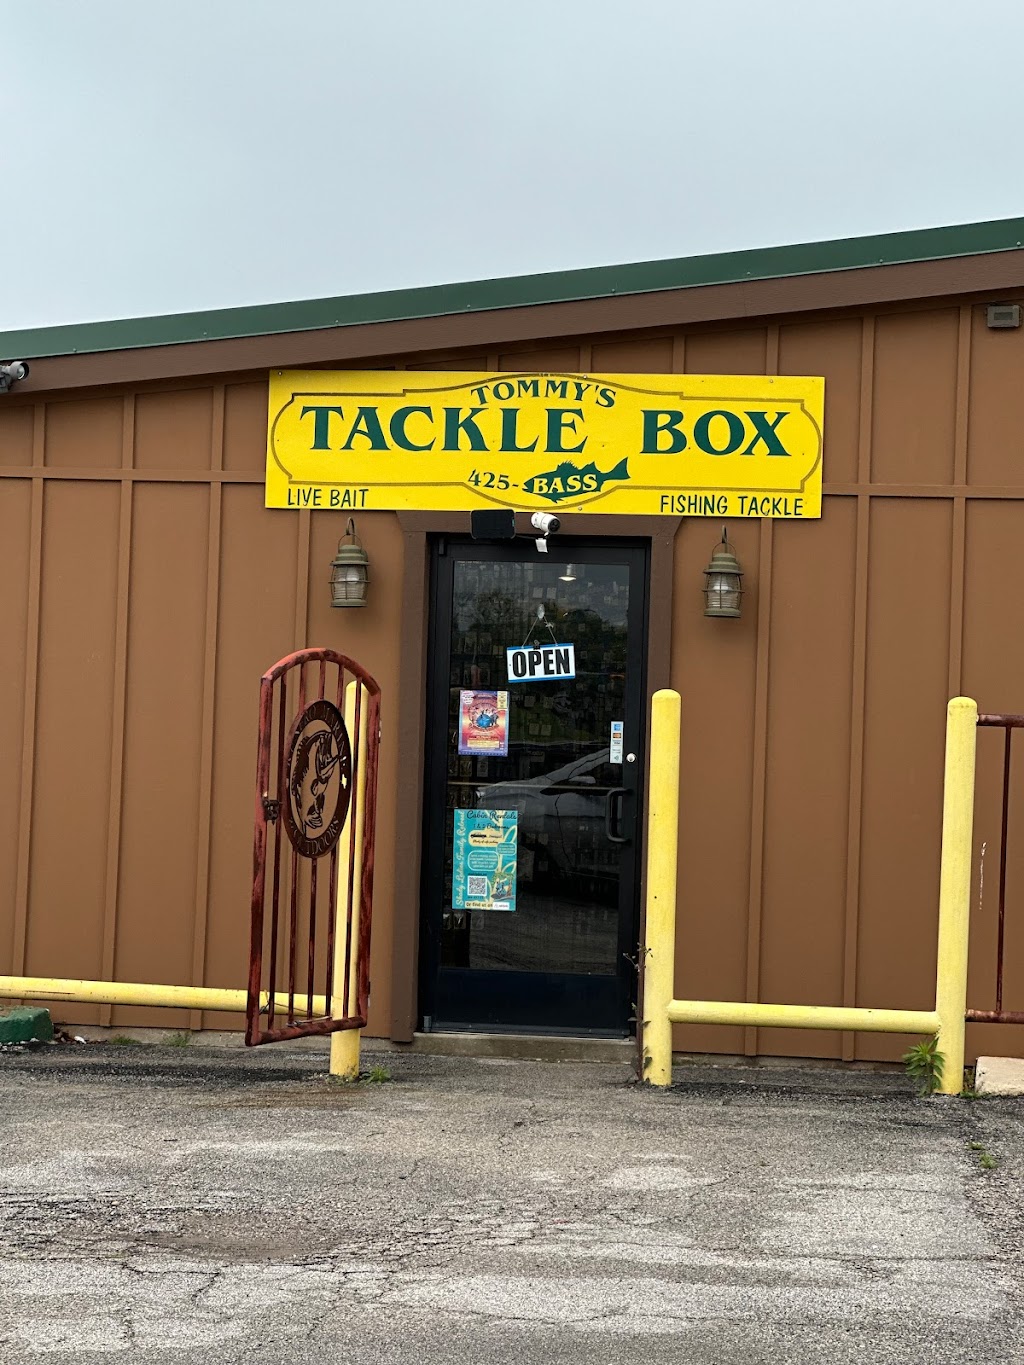 Tommys Tackle BOX | 304 US-175, Eustace, TX 75124, USA | Phone: (903) 425-2277